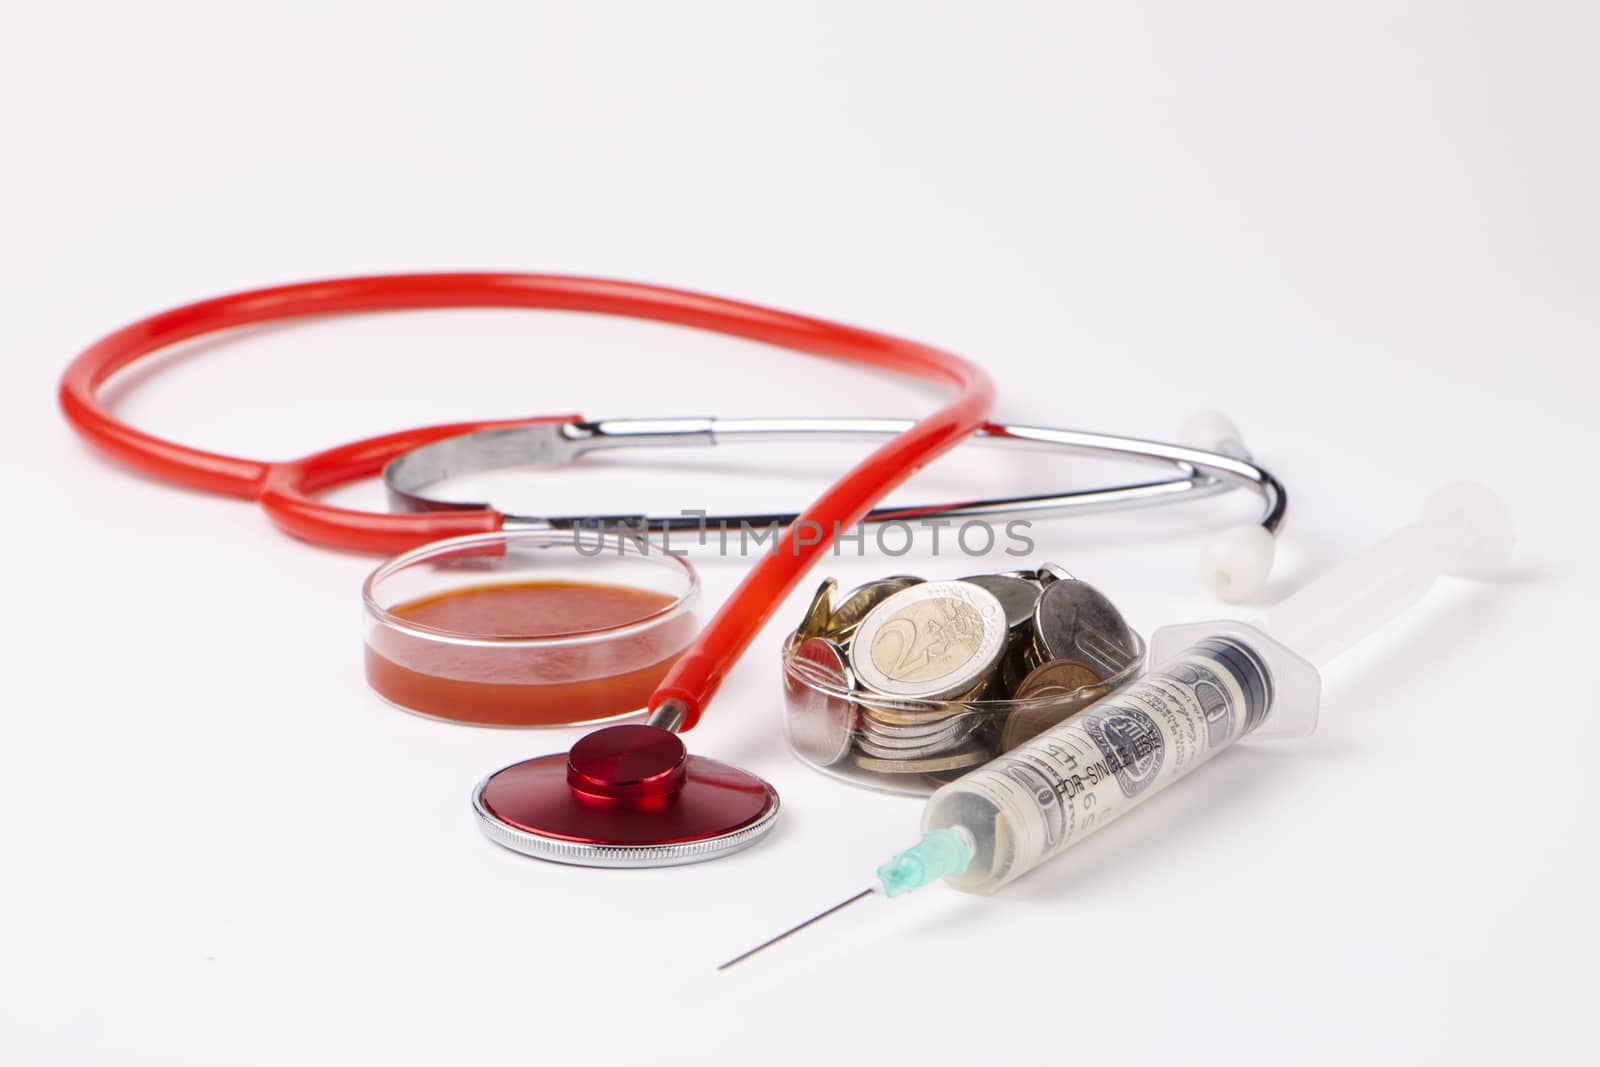 helthcare cost money coins and bills with a red stethoscope and blood sample